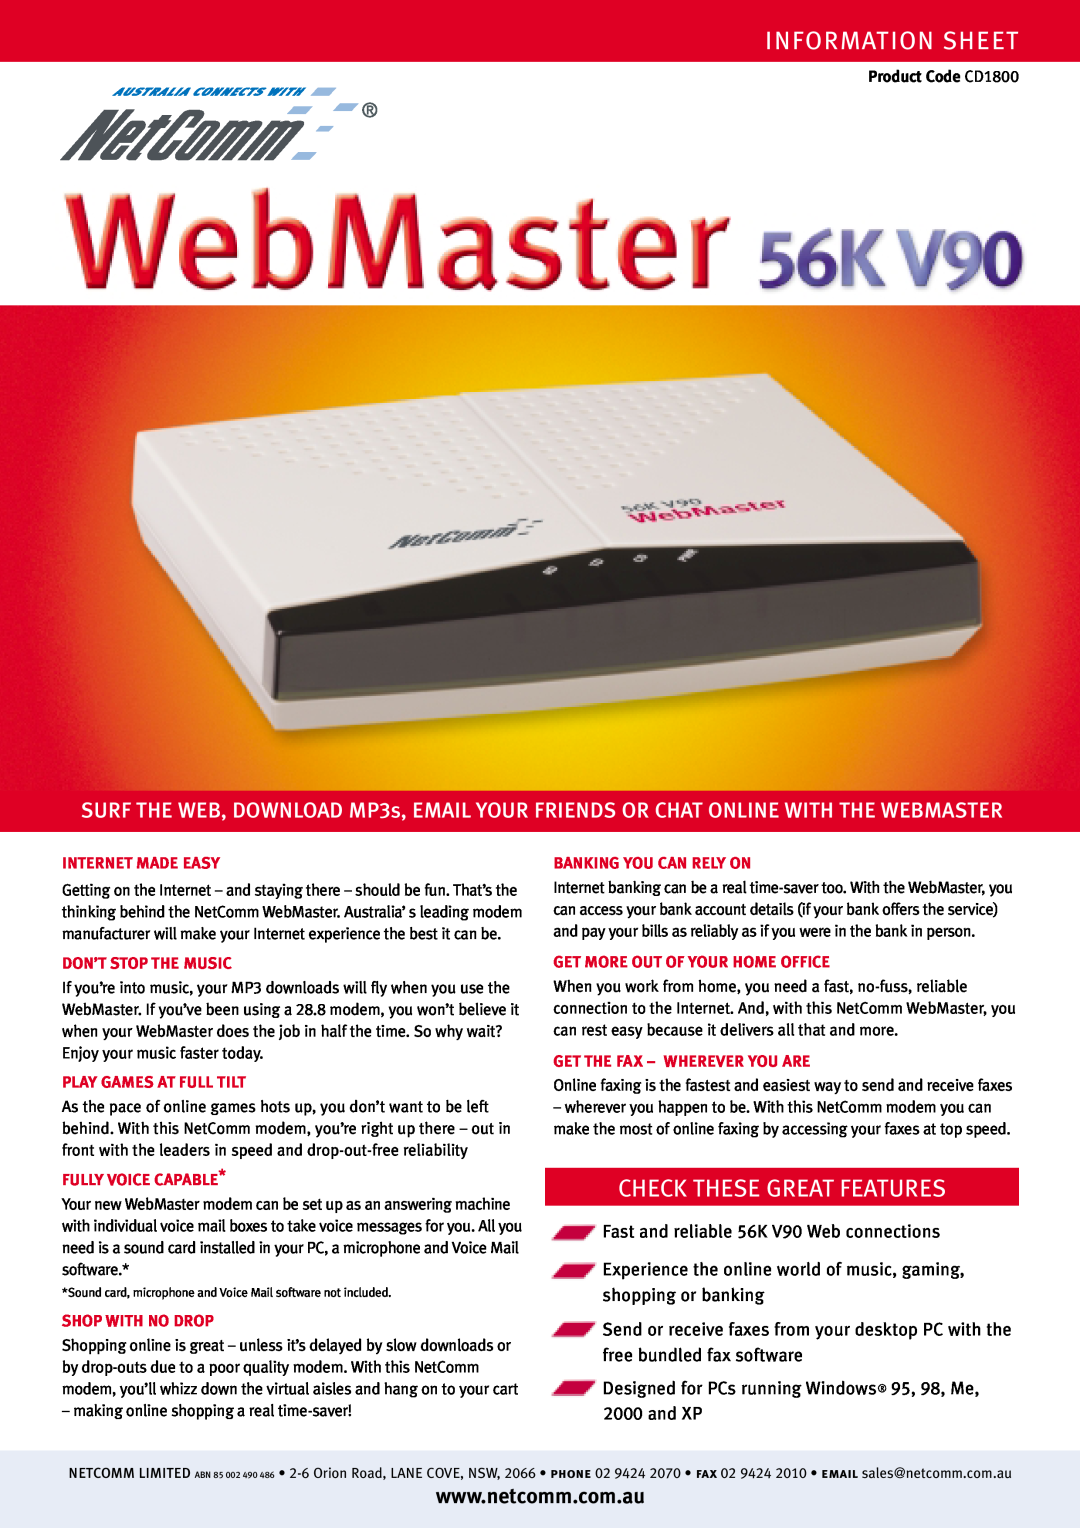 NetComm 56K V90 manual Information Sheet, Check These Great Features, Product Code CD1800, Internet Made Easy 